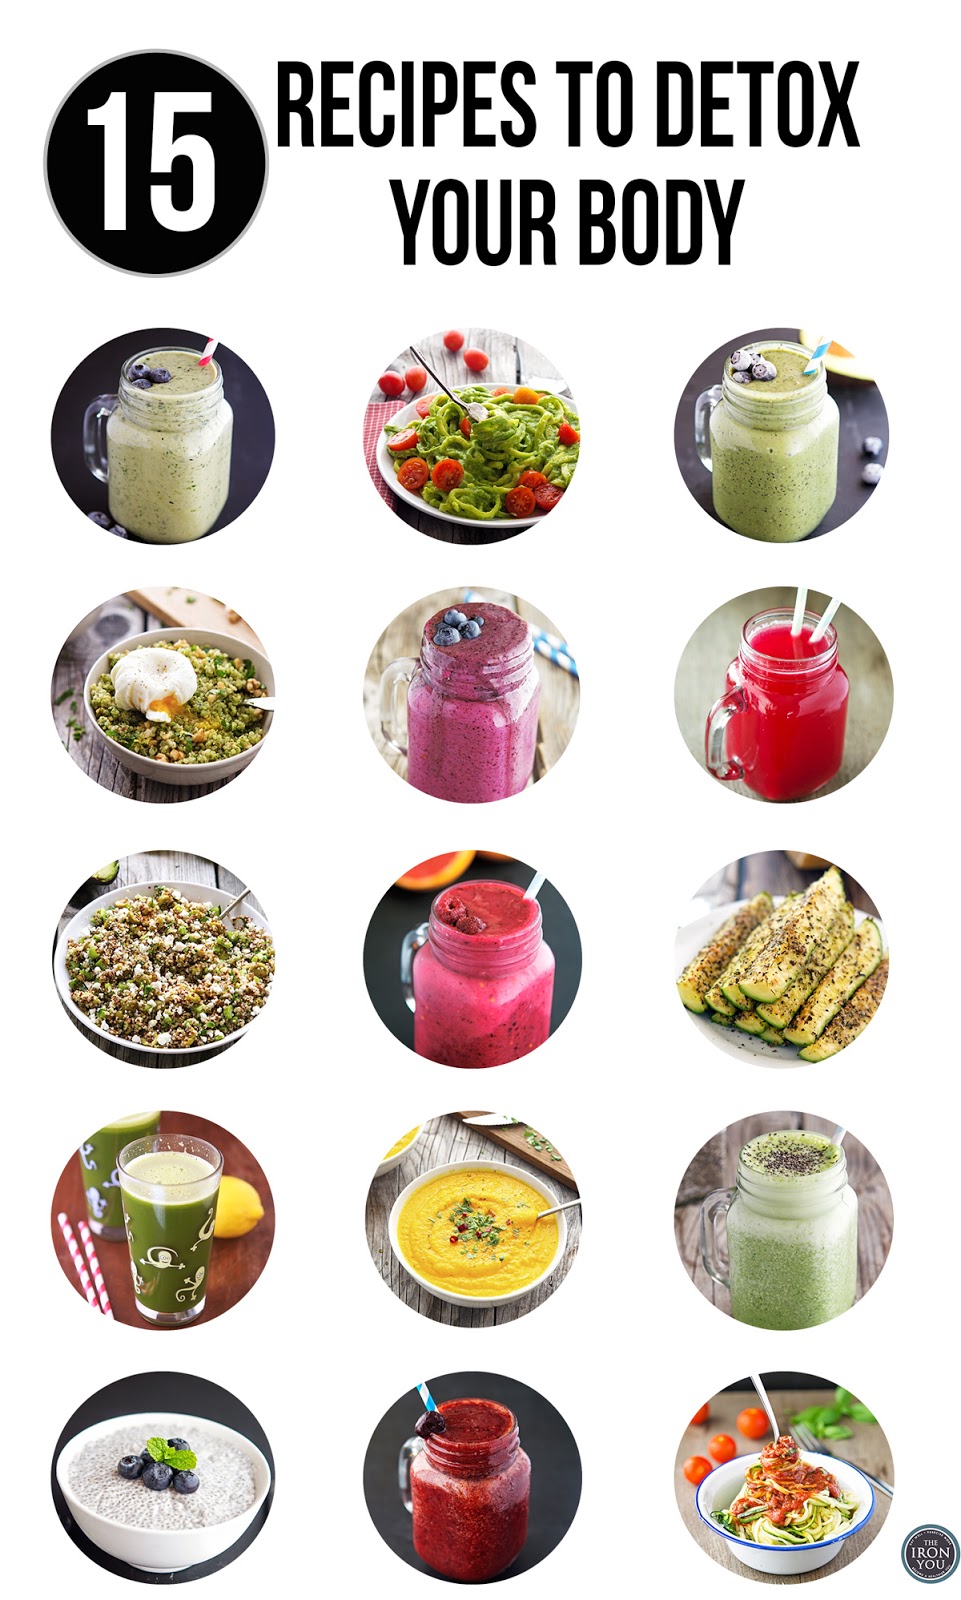 15 Recipes To Detox Your Body